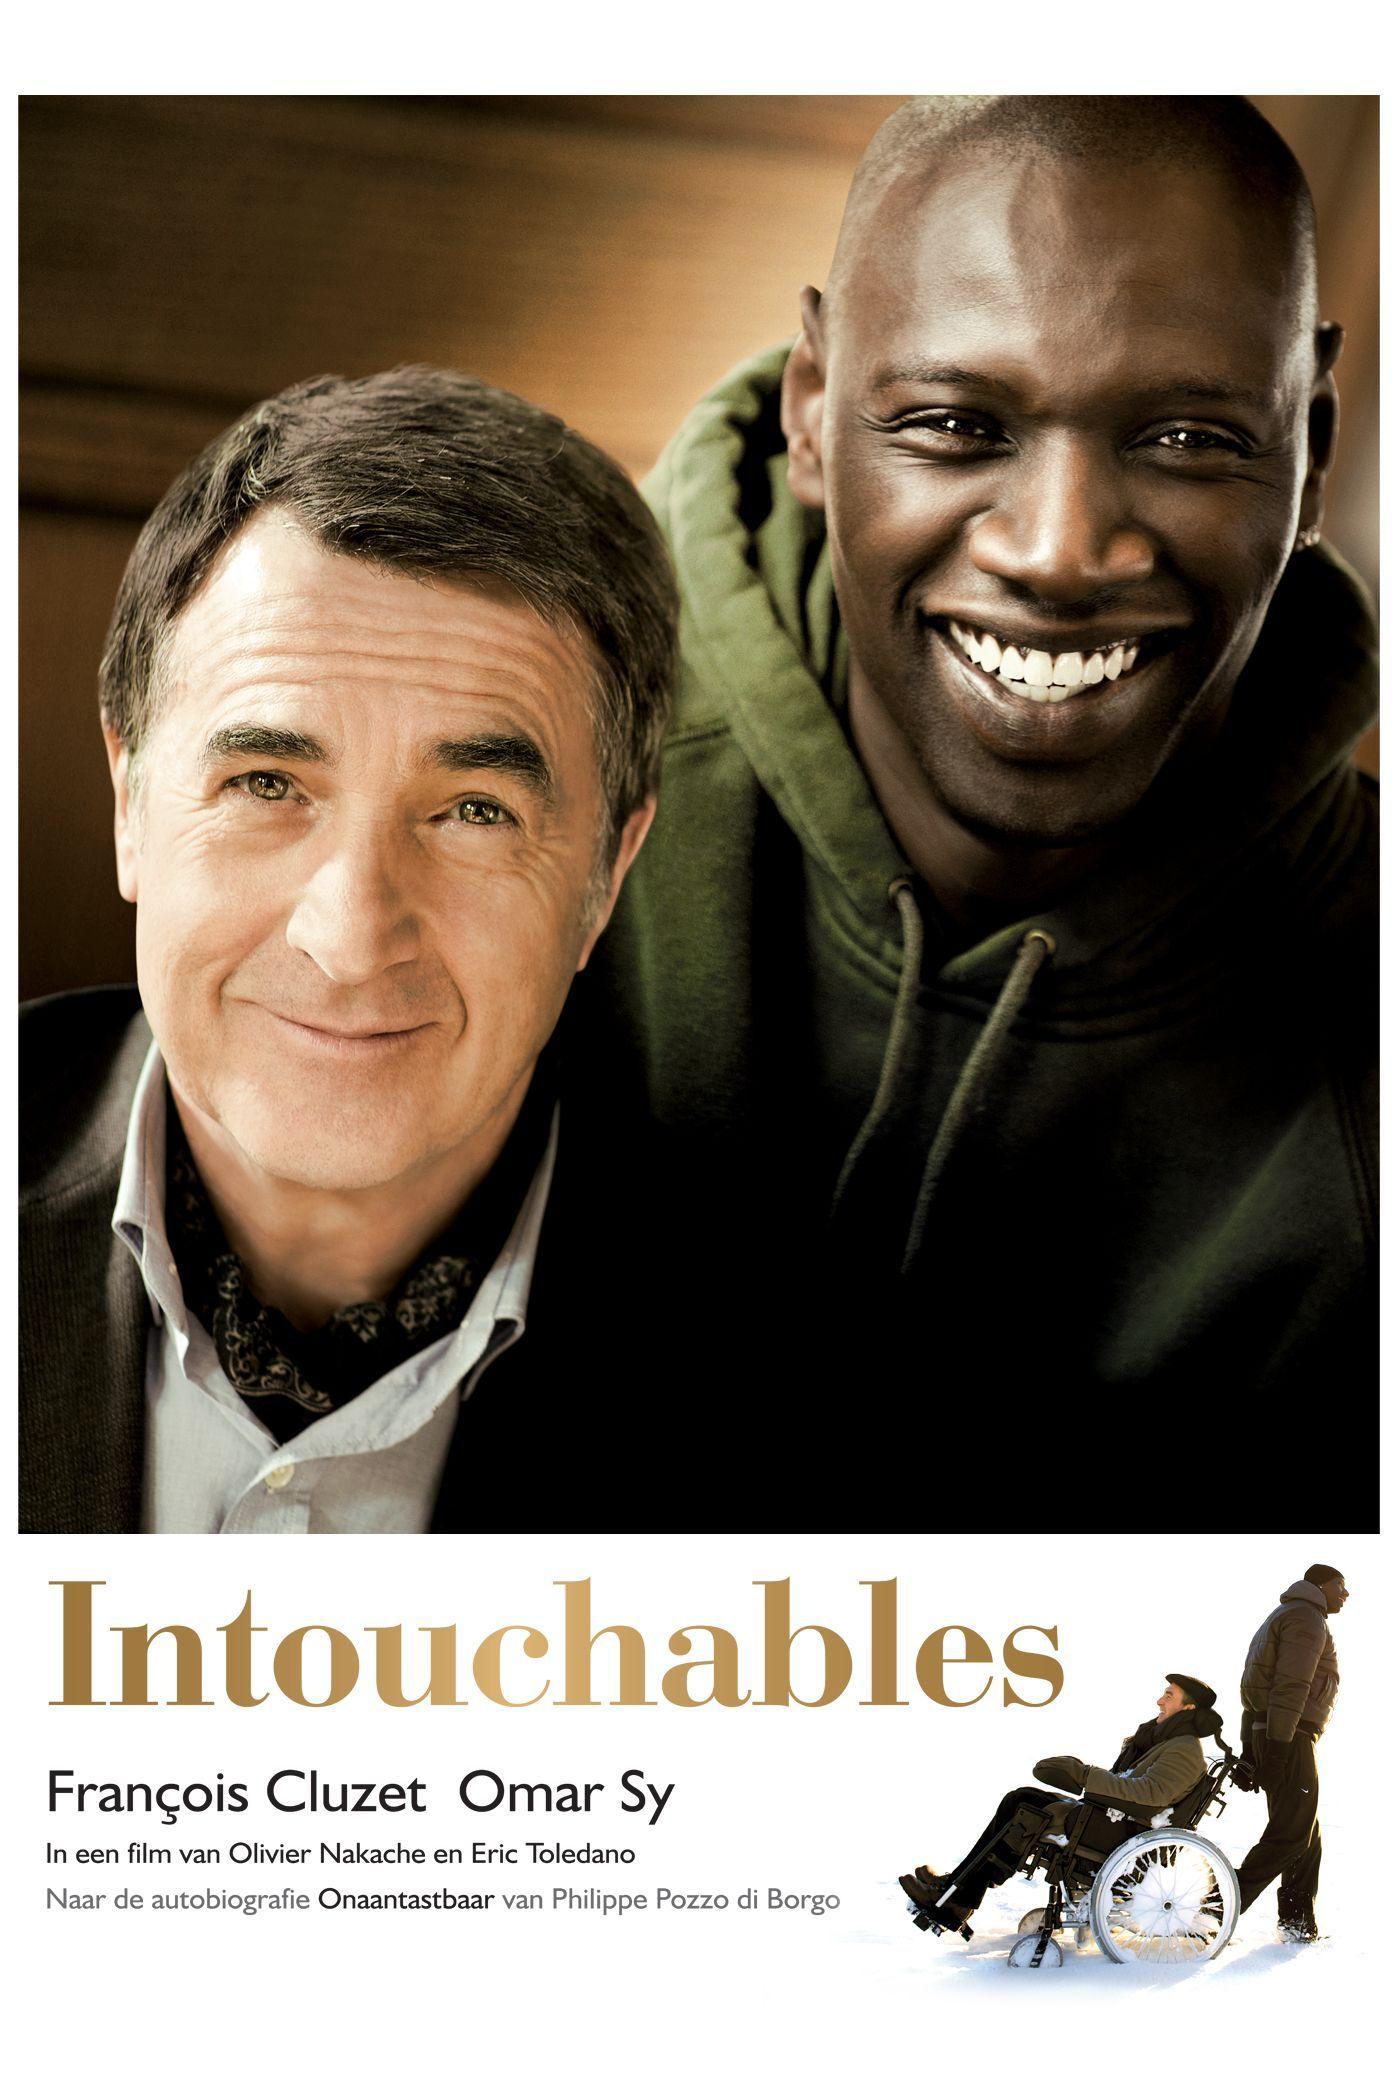 The Intouchables' (2011). Films. Film movie